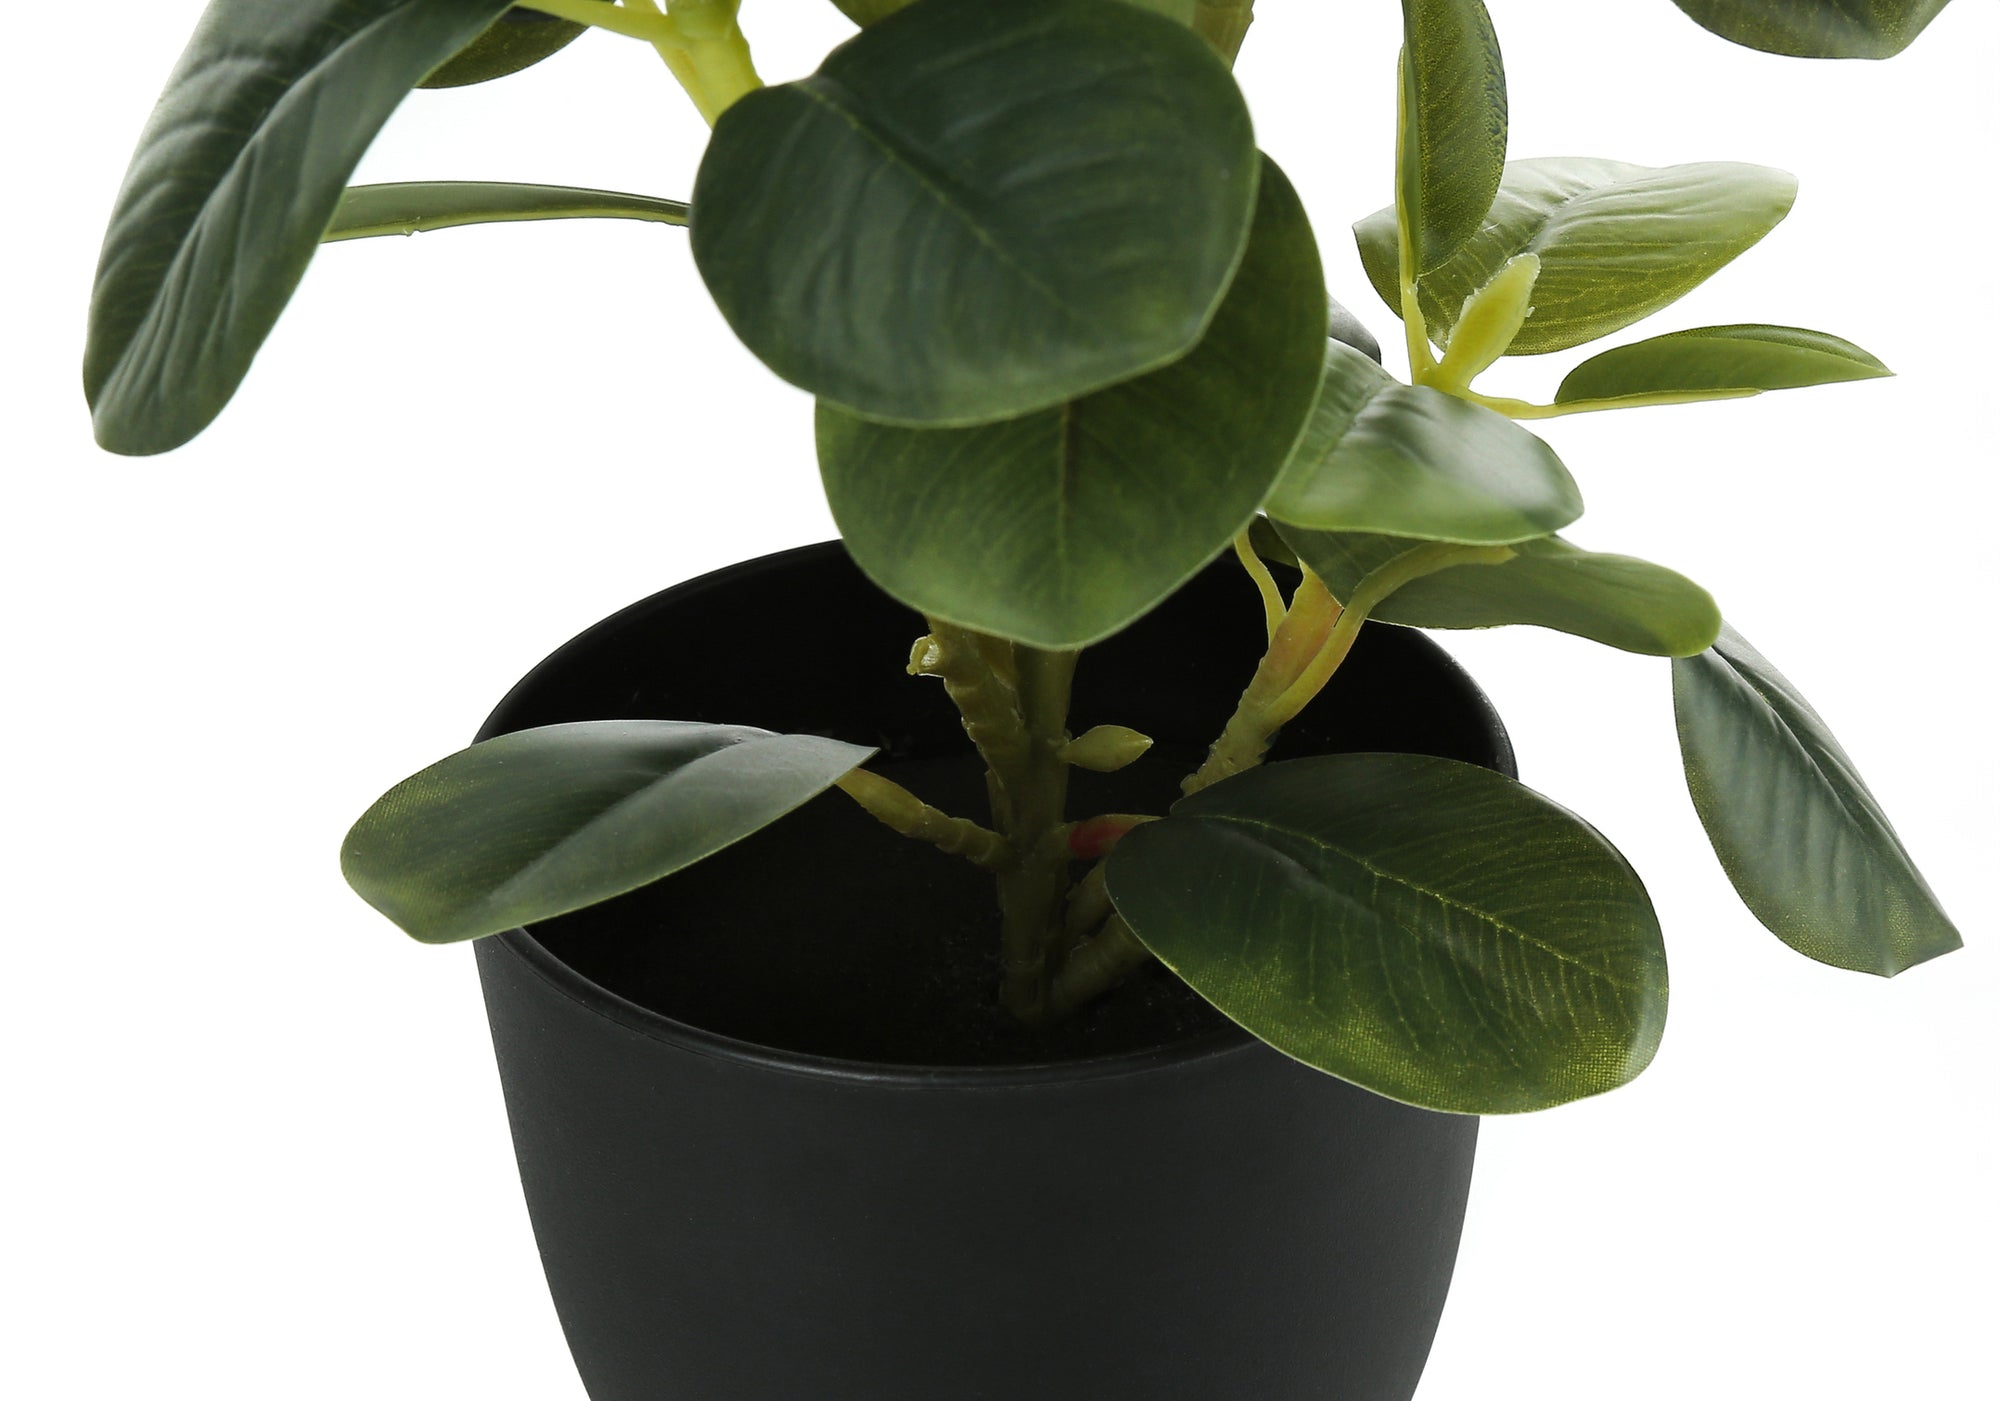 MN-759585    Artificial Plant, 14" Tall, Ficus, Indoor, Faux, Fake, Table, Greenery, Potted, Set Of 2, Decorative, Green Leaves, Black Pots